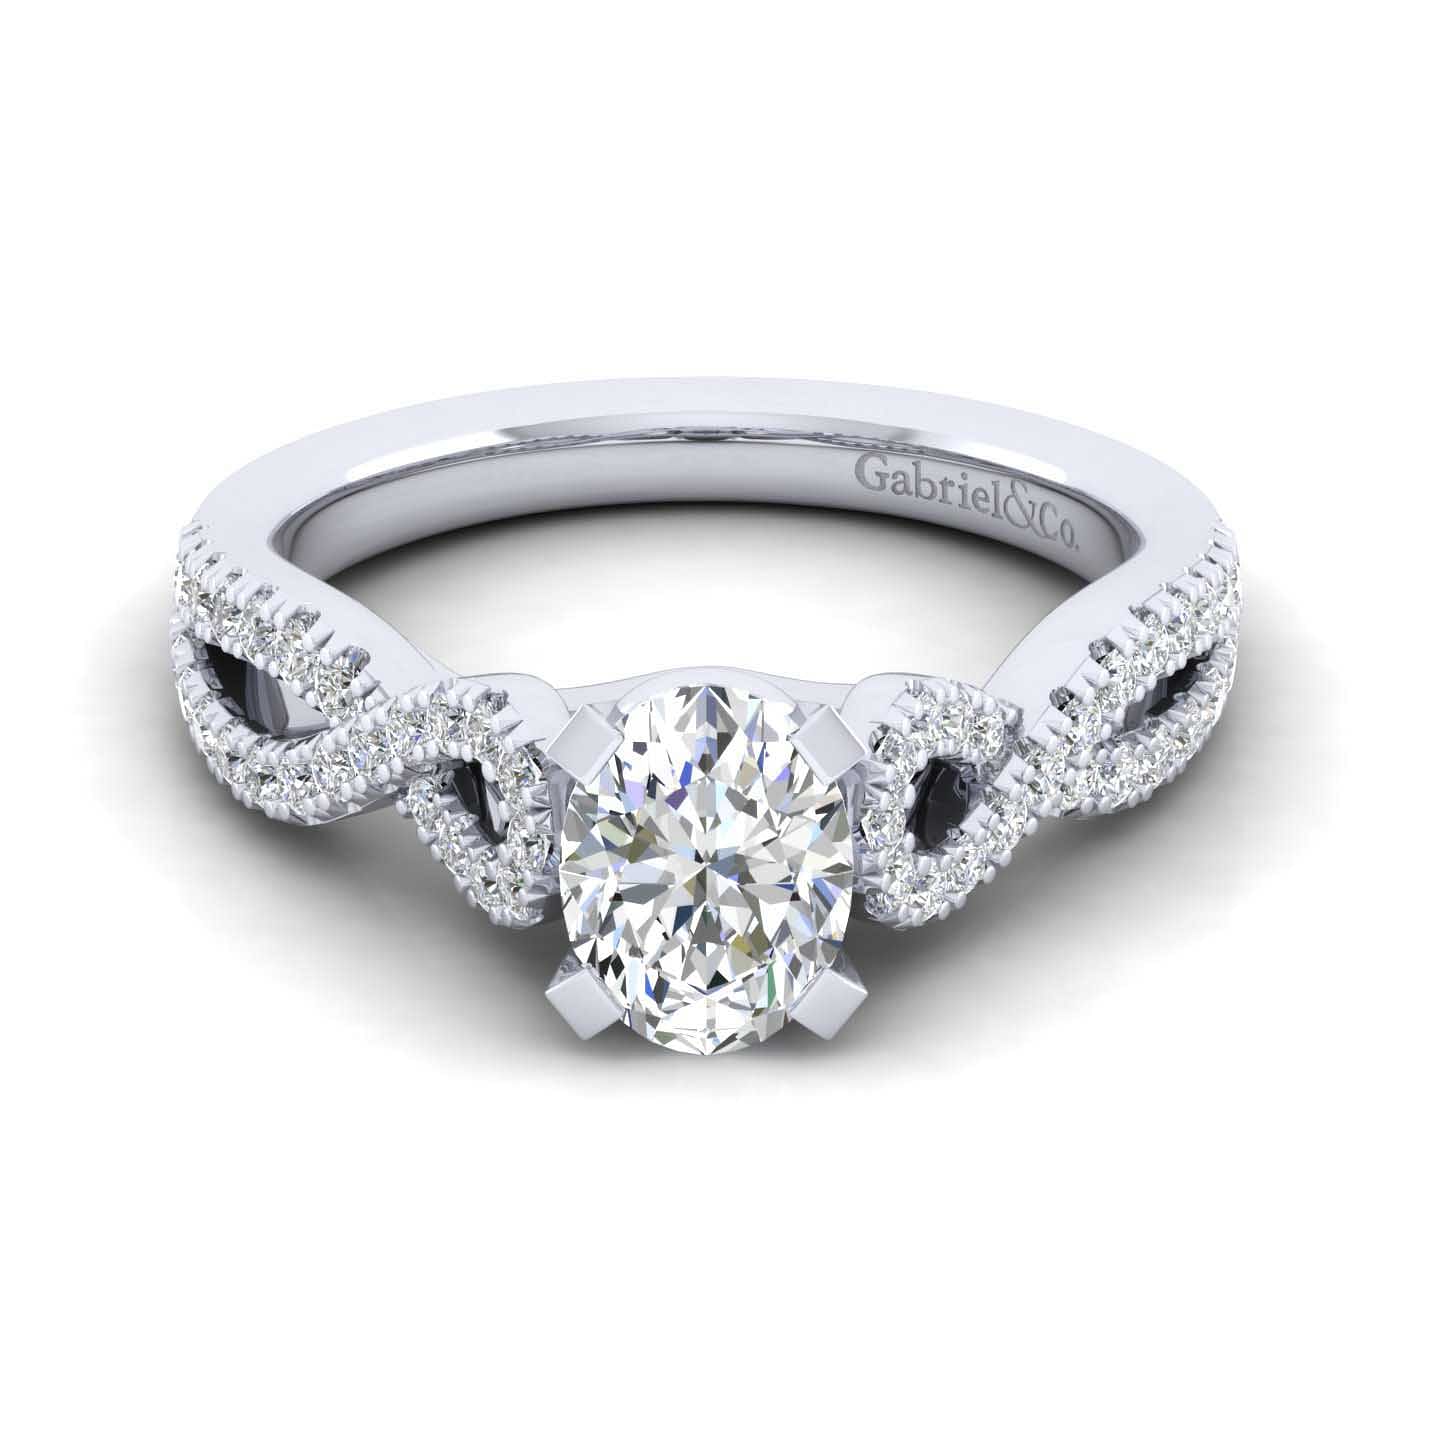 14K White Gold Twisted Oval Diamond Engagement Ring